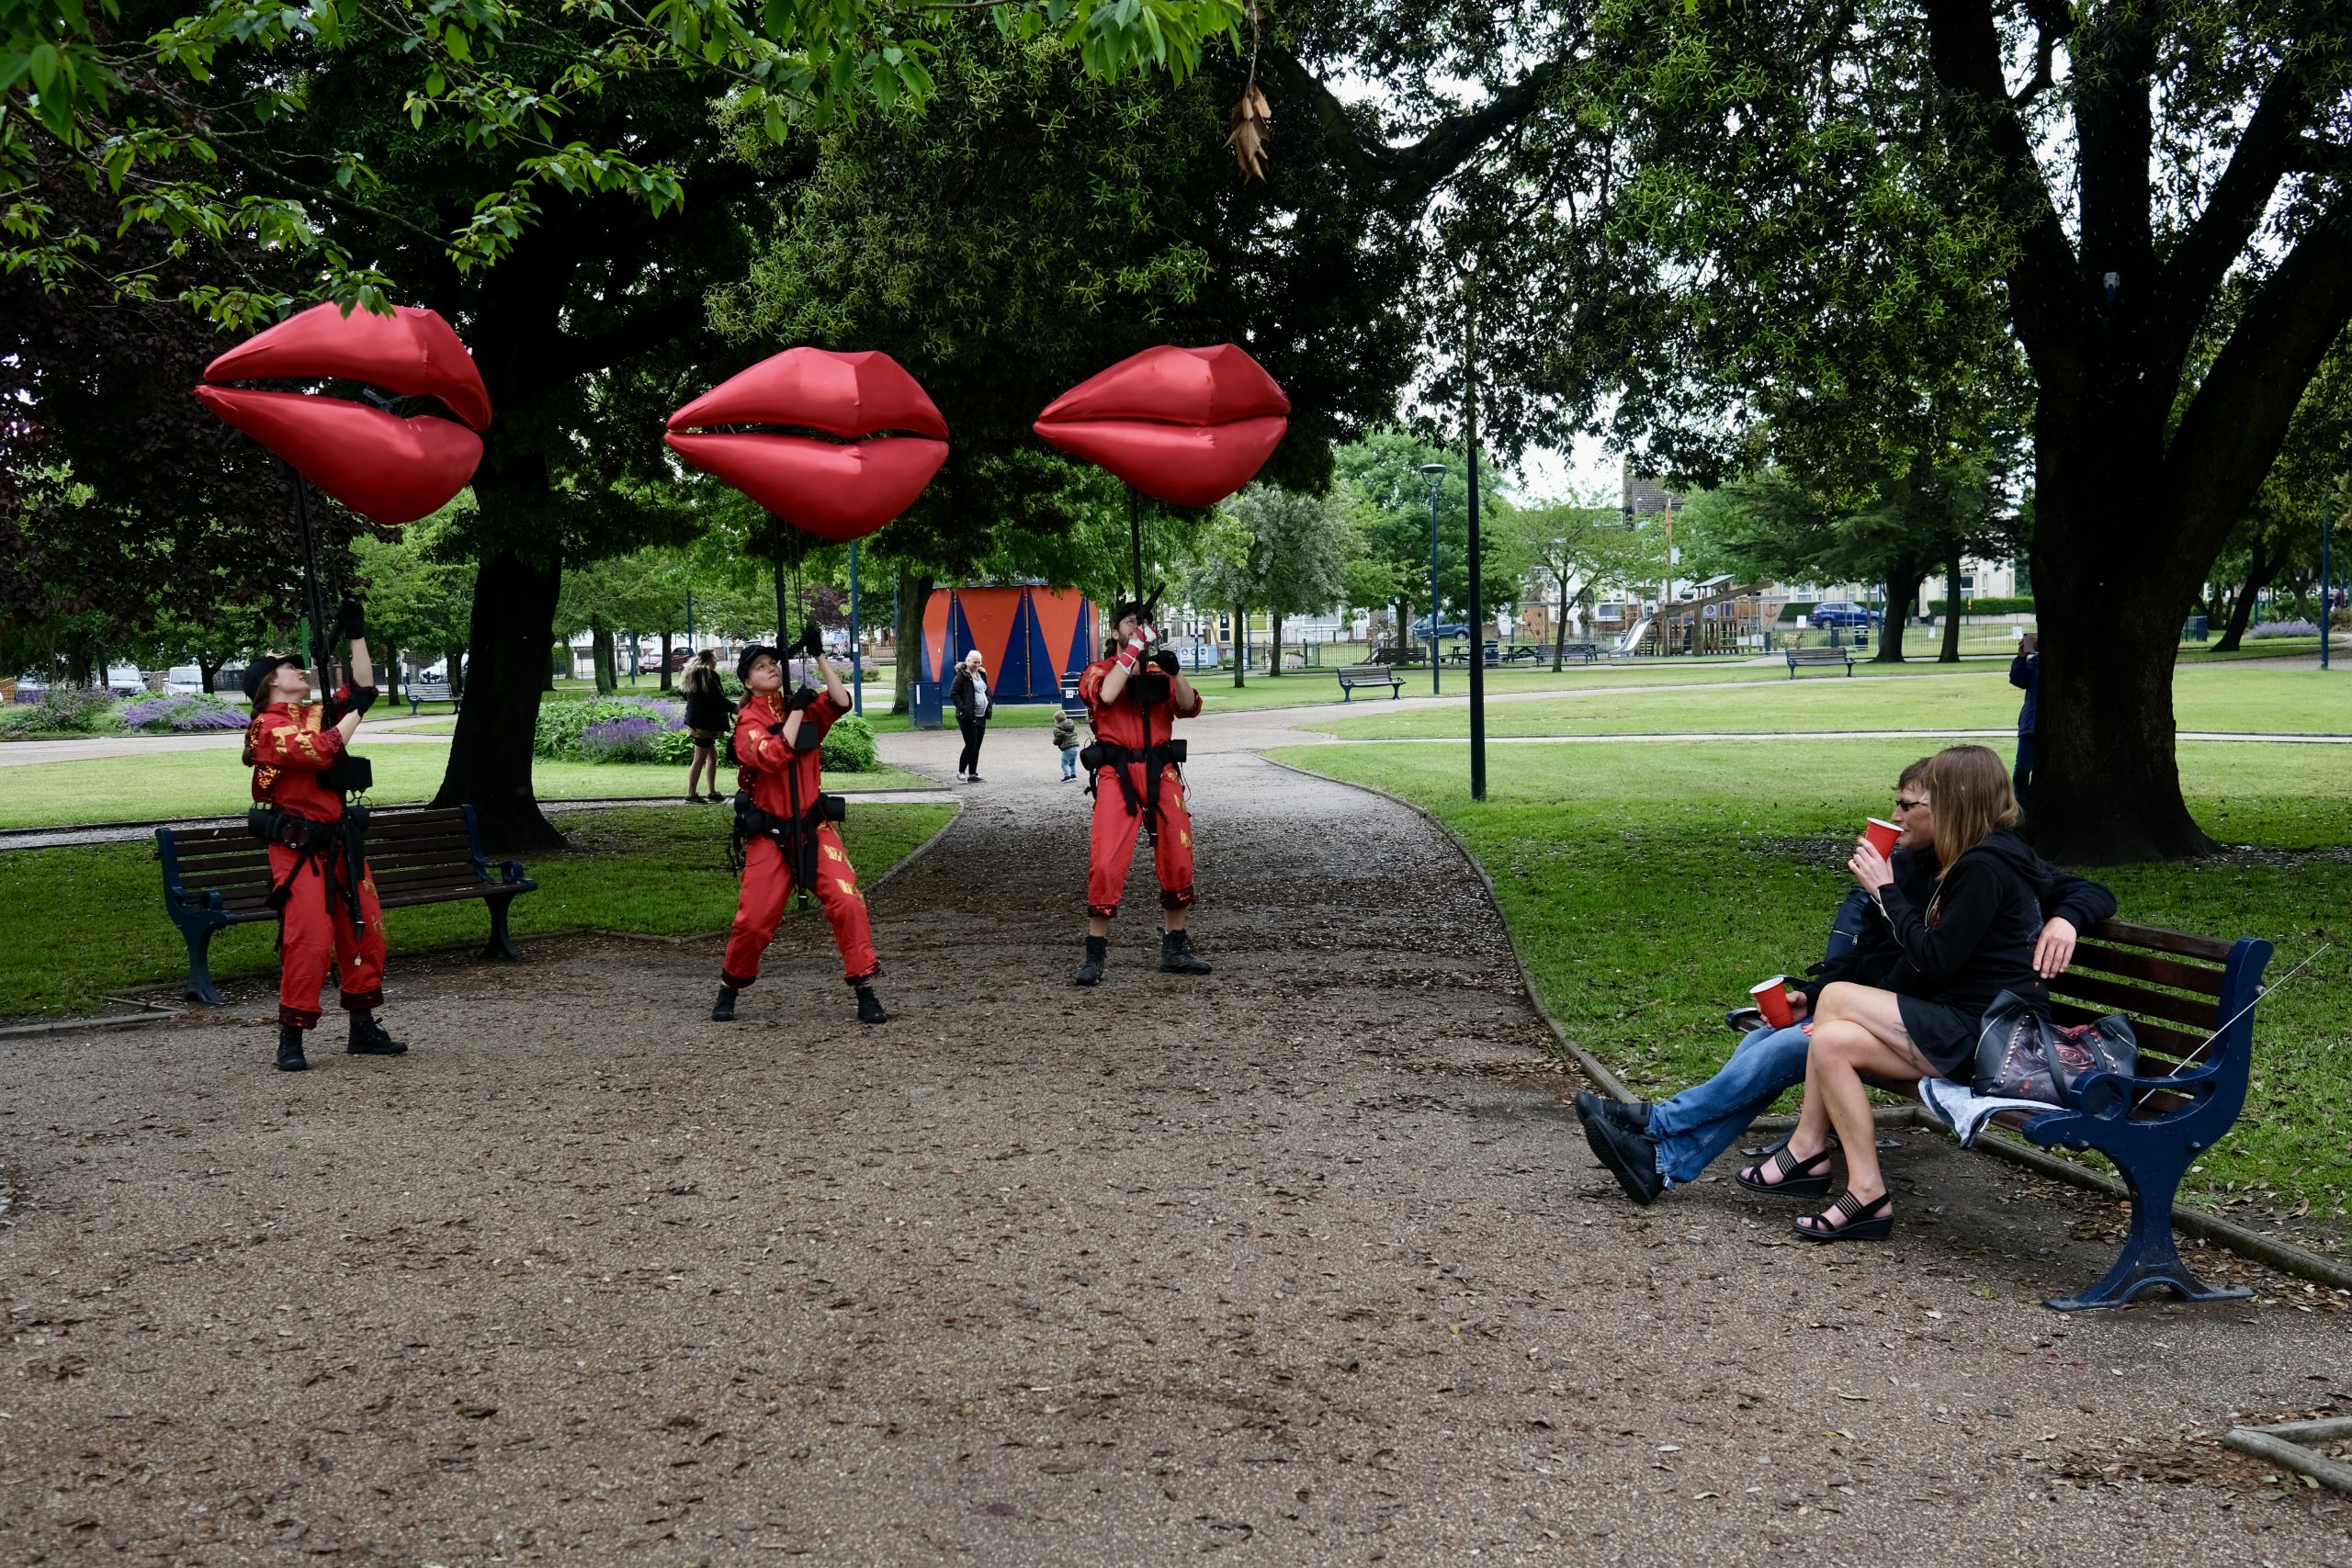 Three puppets manned by three puppeteers, of giant red pairs of lips. Two people sit on a bench opposite them.